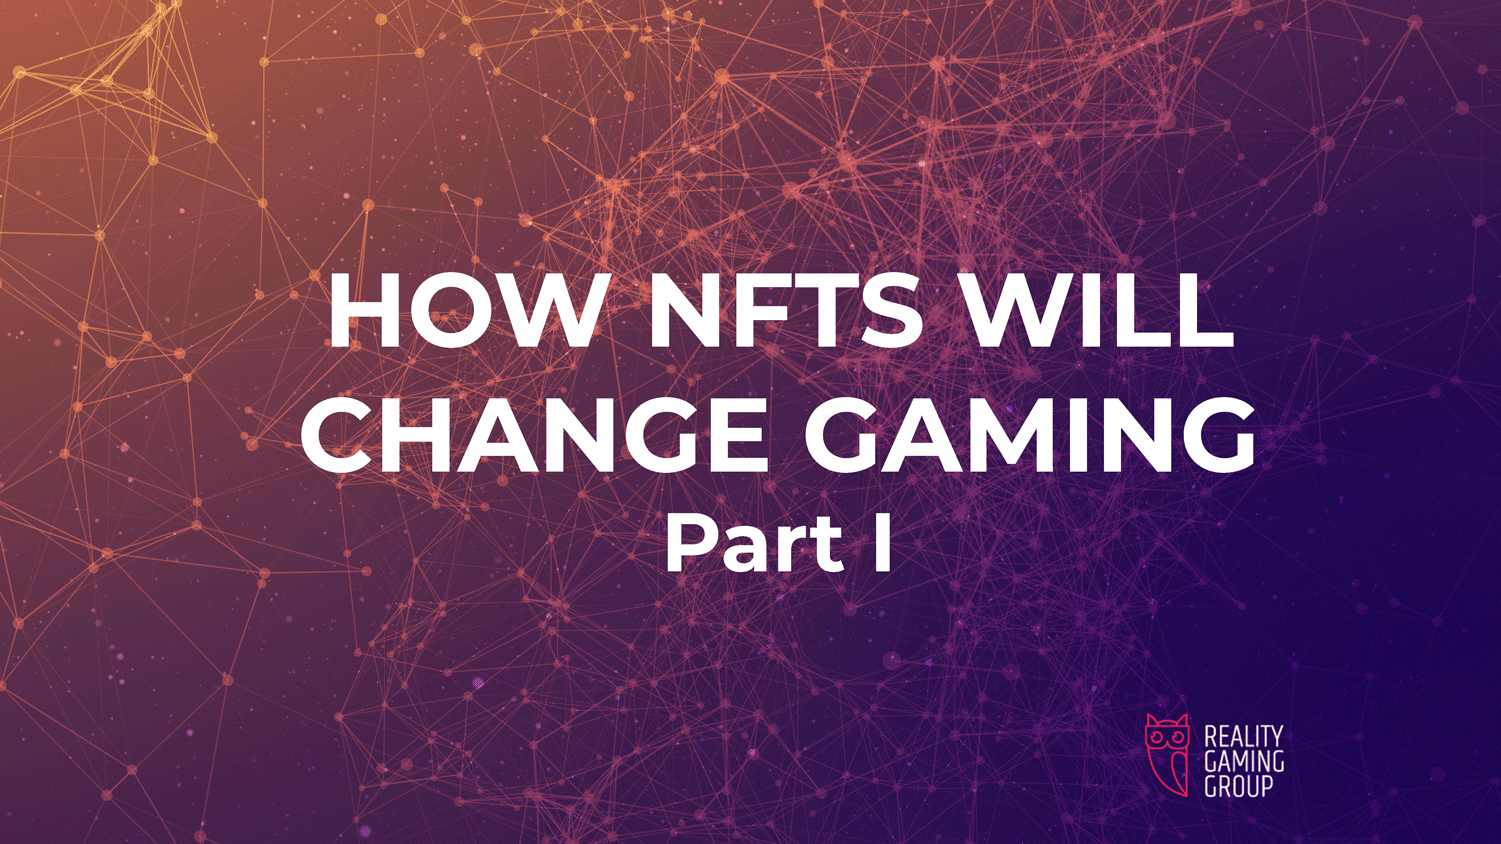 How NFTs will change gaming part 1